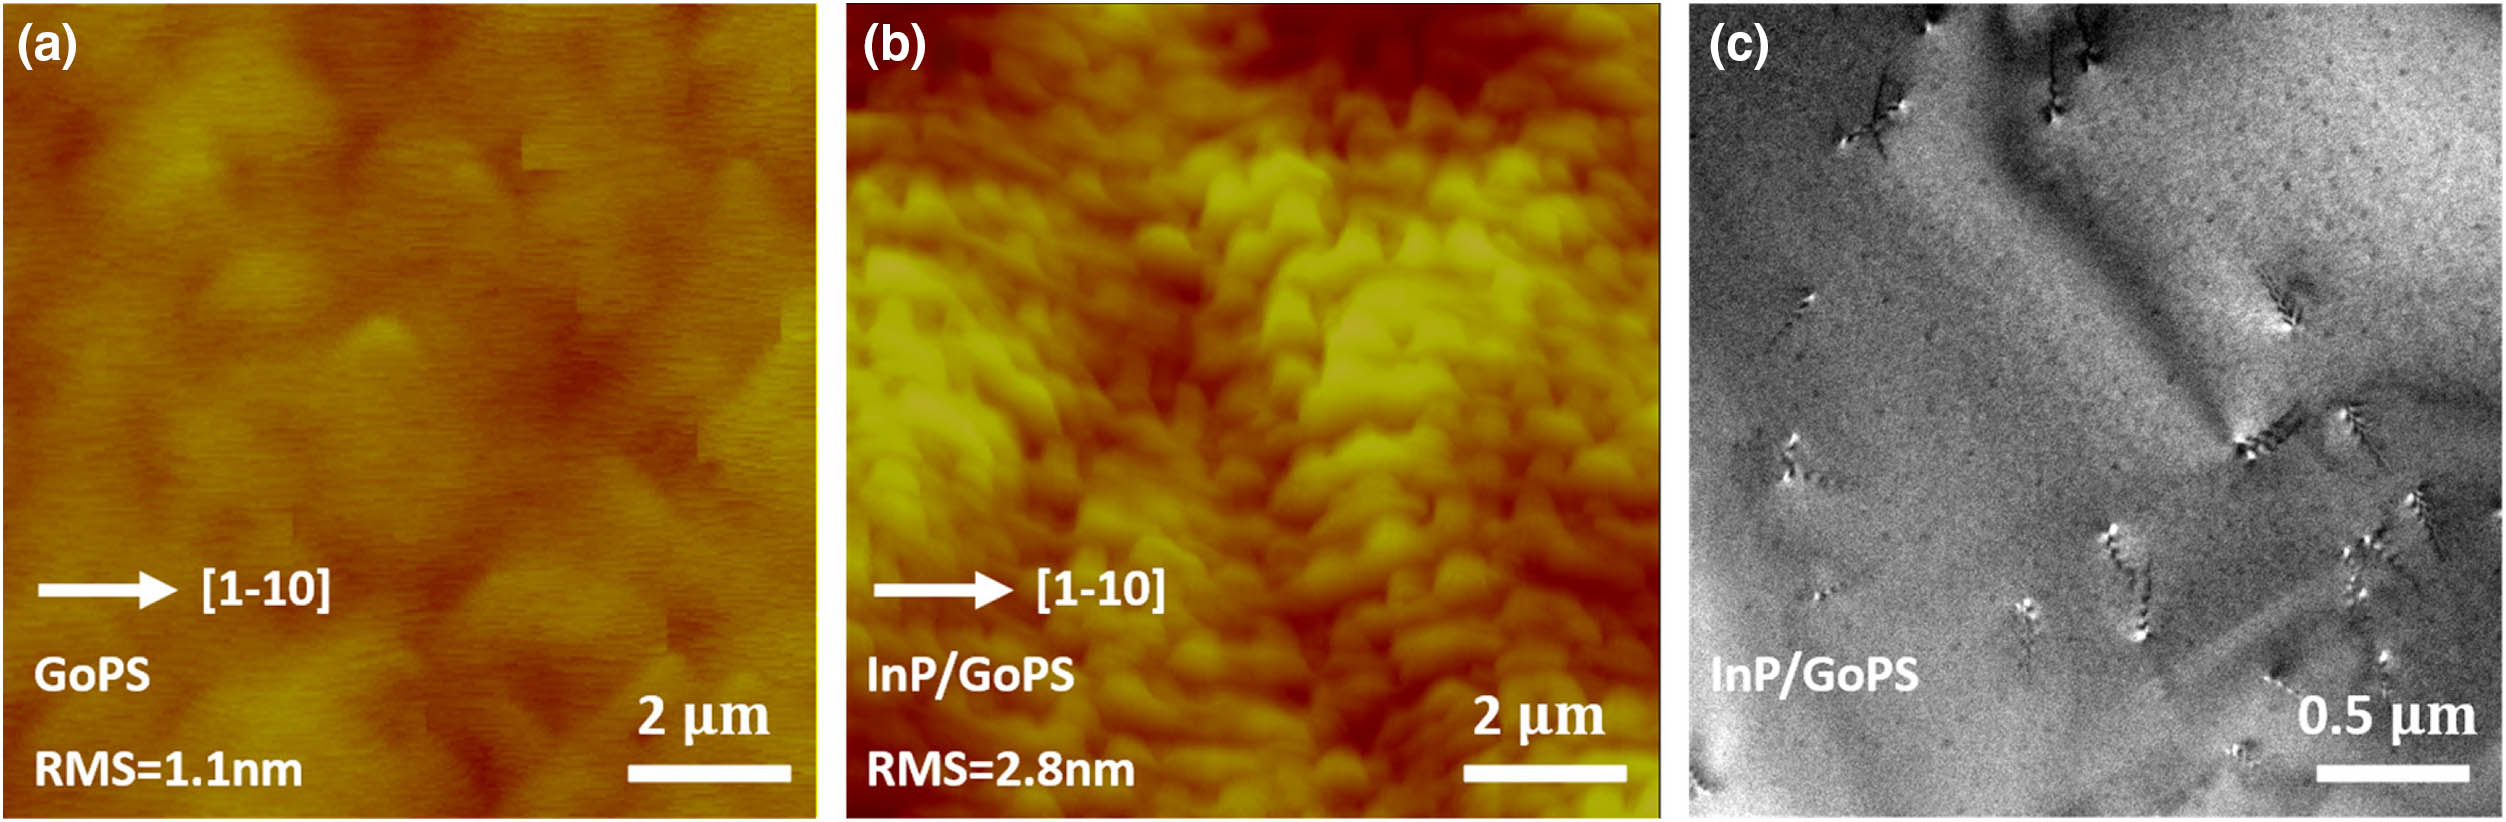 (a) AFM image of 1.1 μm GaAs on planar silicon after TCA, and RMS of the 10 μm×10 μm area is 1.1 nm. (b) AFM image of 3.1 μm InP on GoPS, and RMS of the 10 μm×10 μm area is 2.8 nm. (c) Representative plan view TEM image of InP on GoPS.